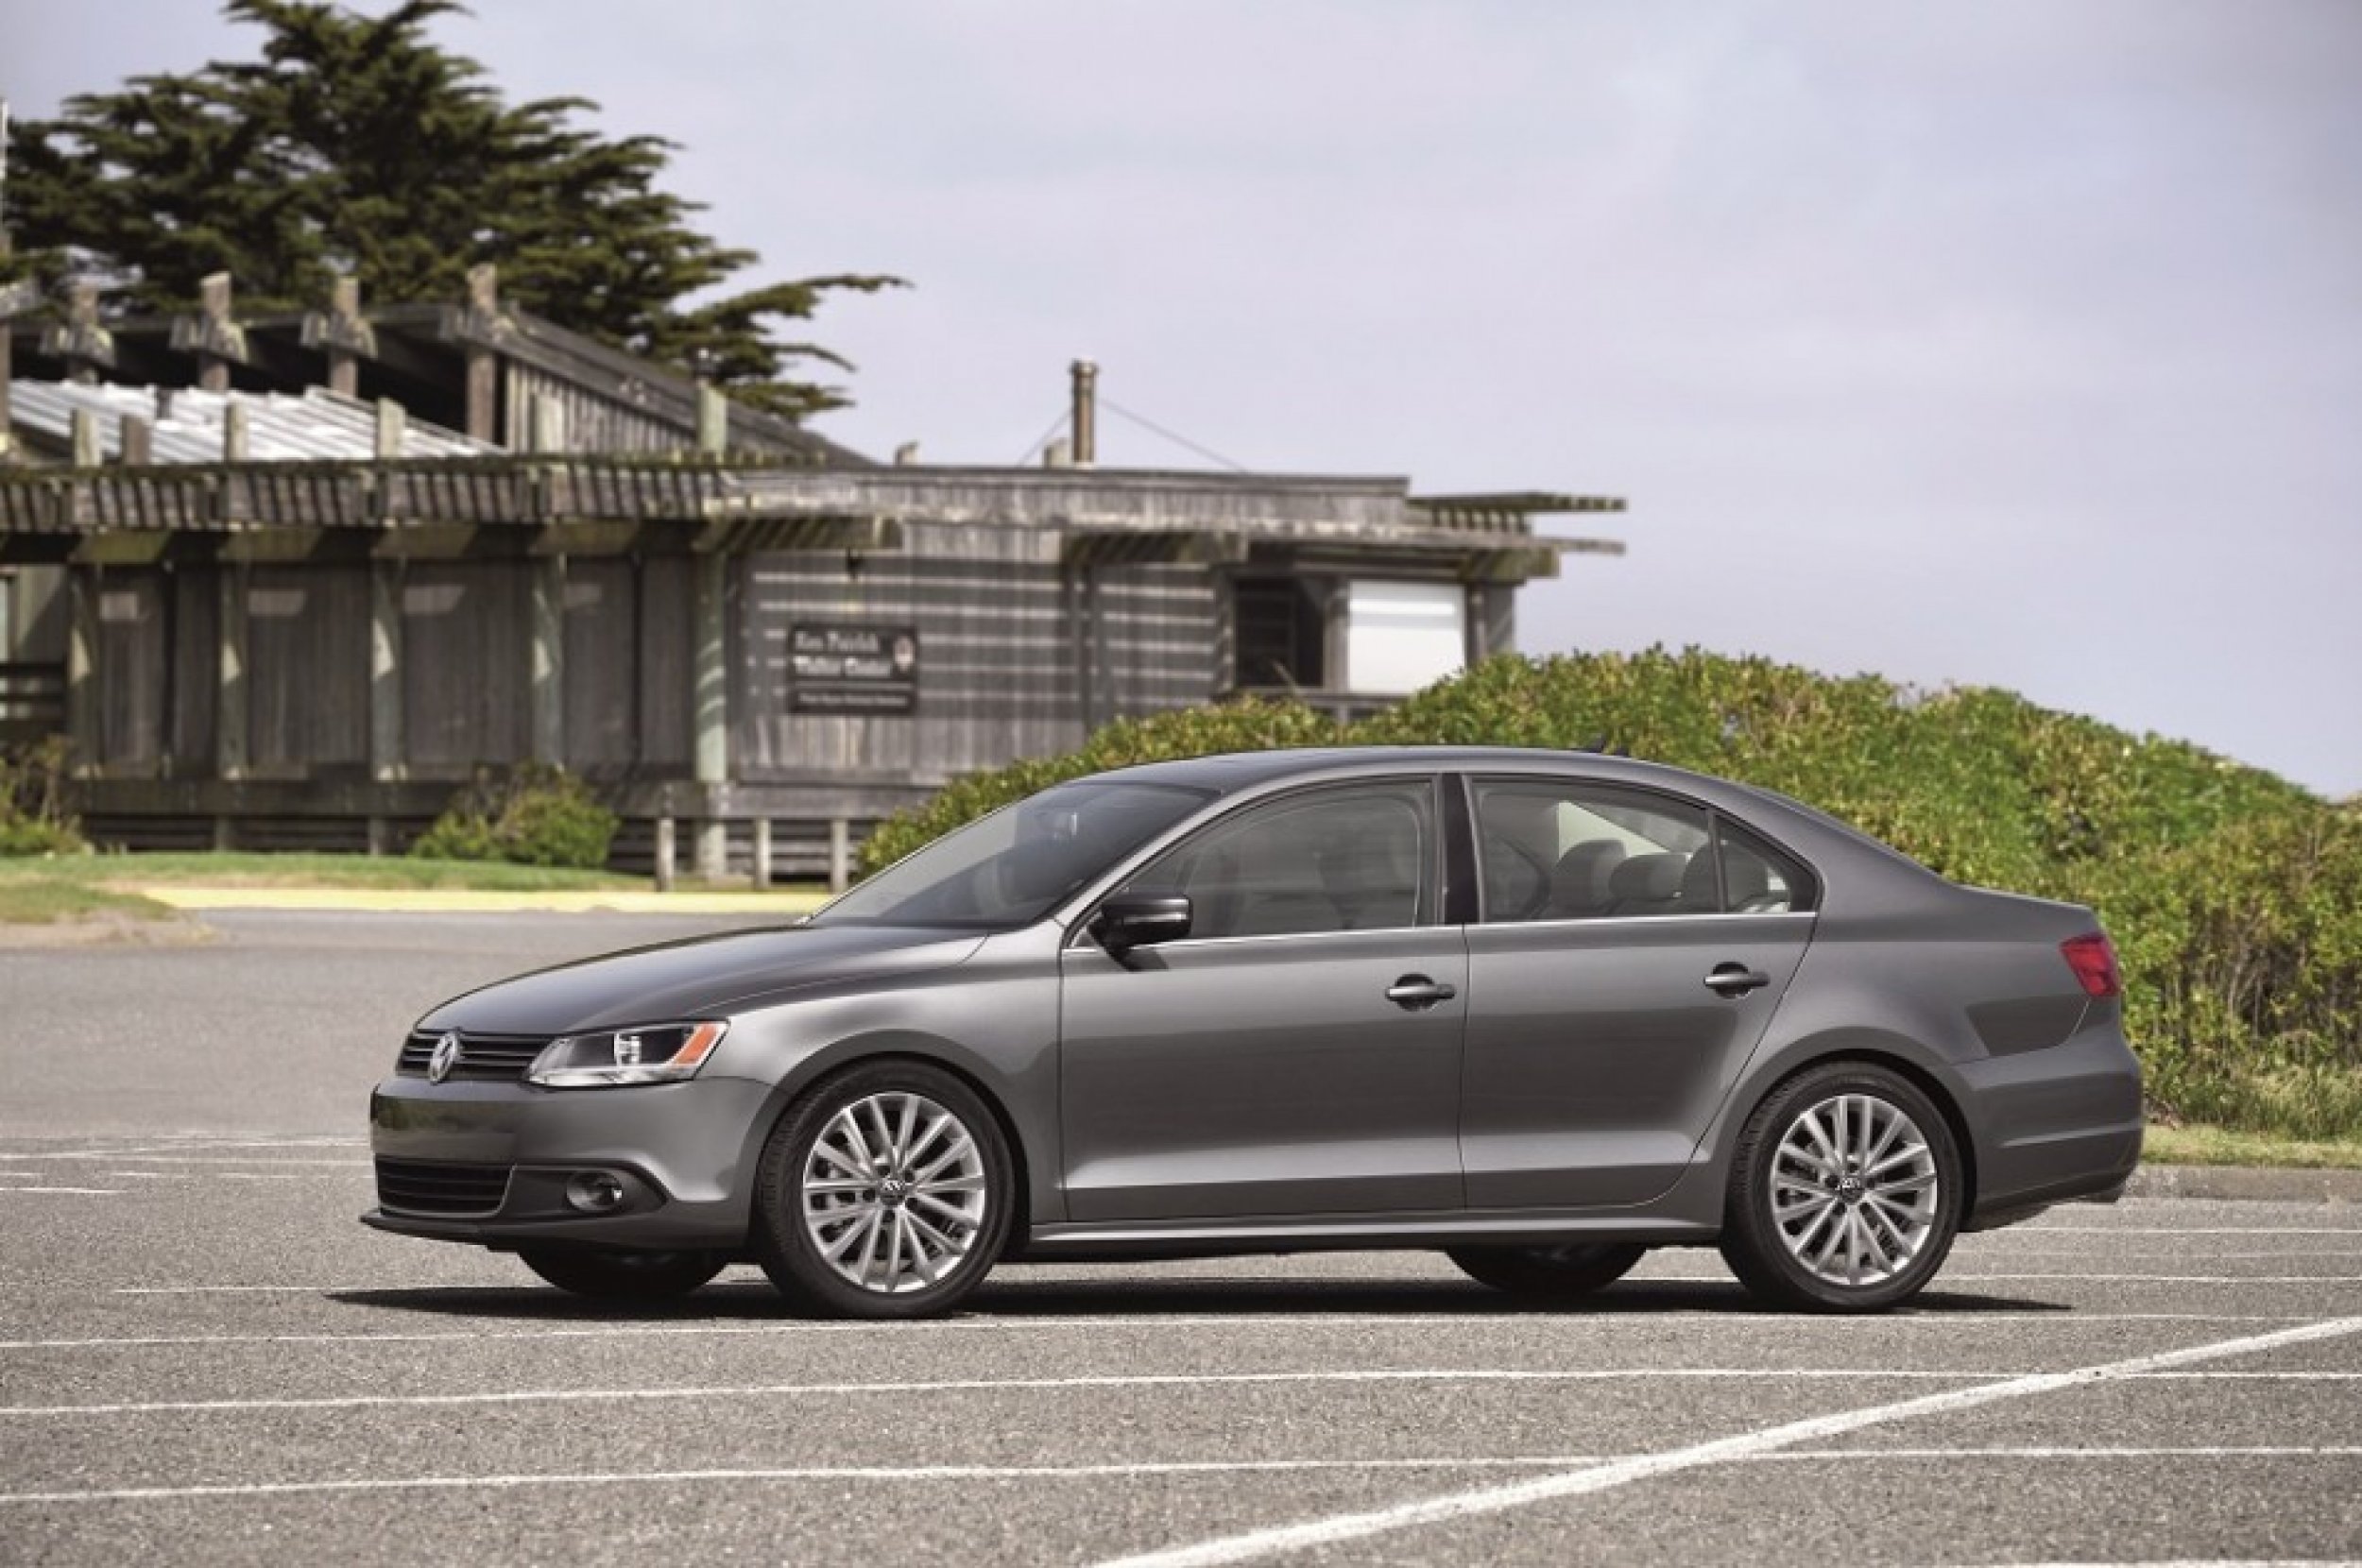 The 6 car in Americas wealthiest zip codes is the Volkswagen Jetta with an MSRP of 26,085.